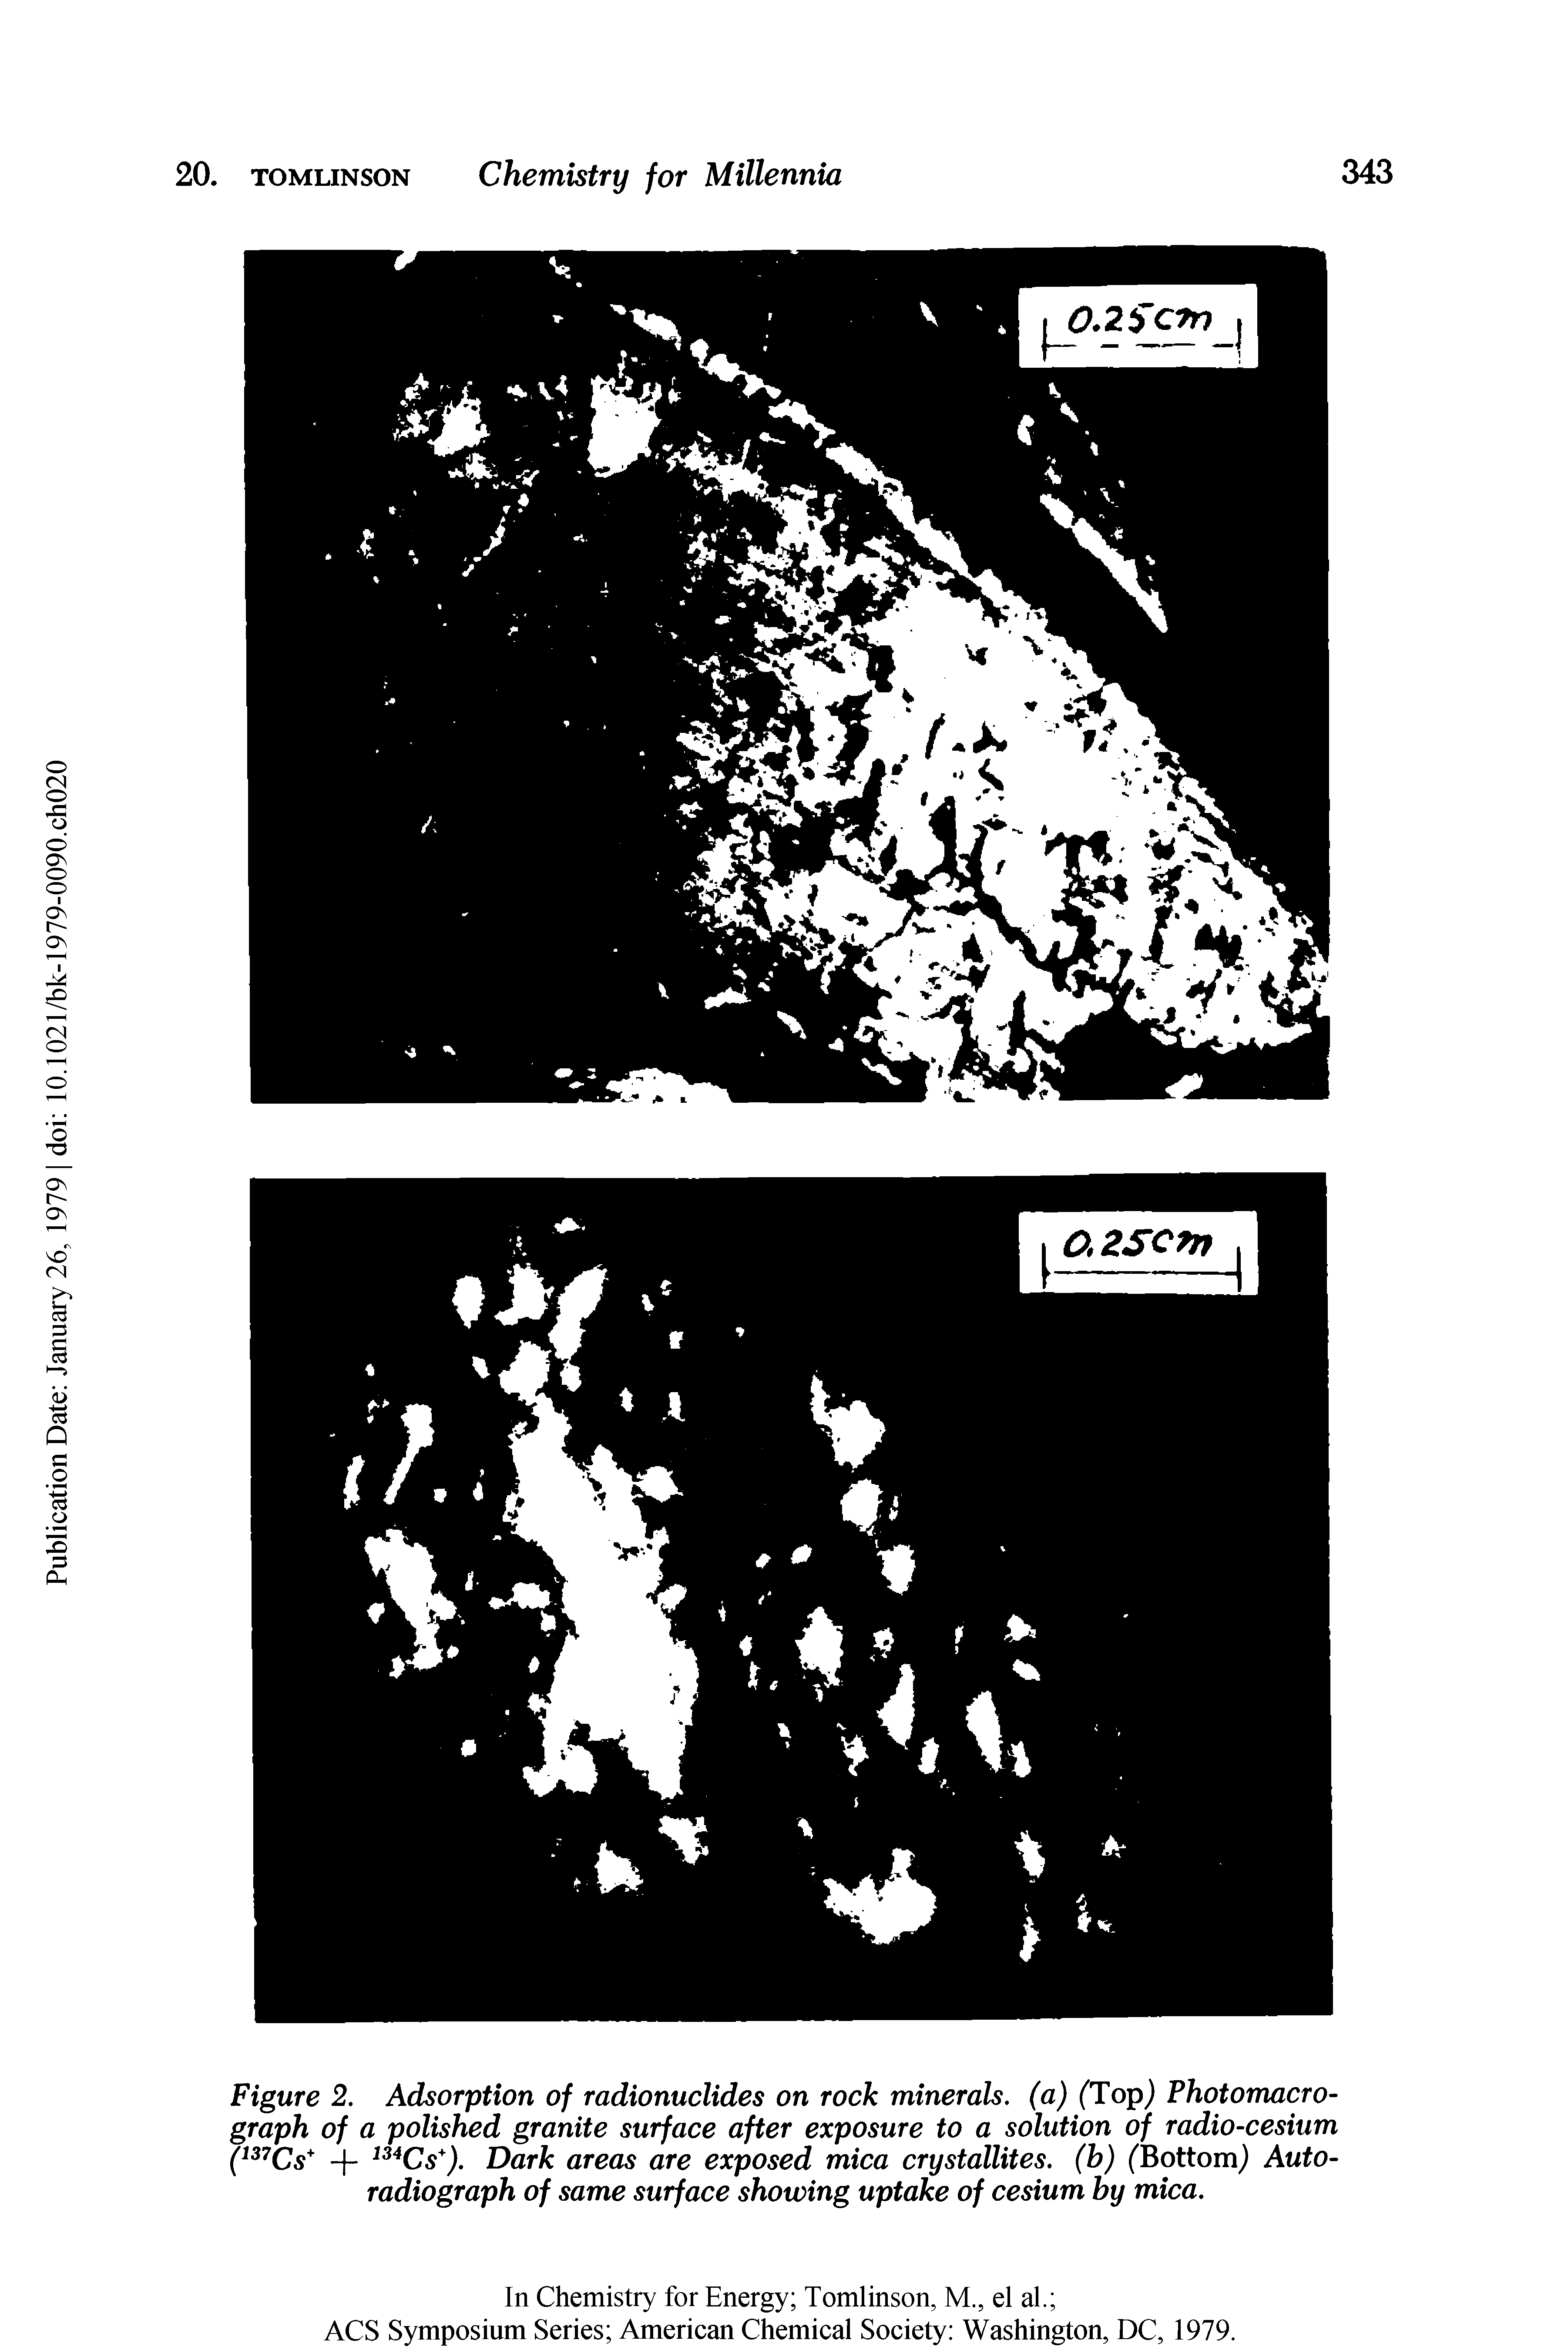 Figure 2. Adsorption of radionuclides on rock minerals, (a) (Topj Photomacrograph of a polished granite surface after exposure to a solution of radio-cesium Dark areas are exposed mica crystallites, (b) (Bottom) Autoradiograph of same surface showing uptake of cesium by mica.